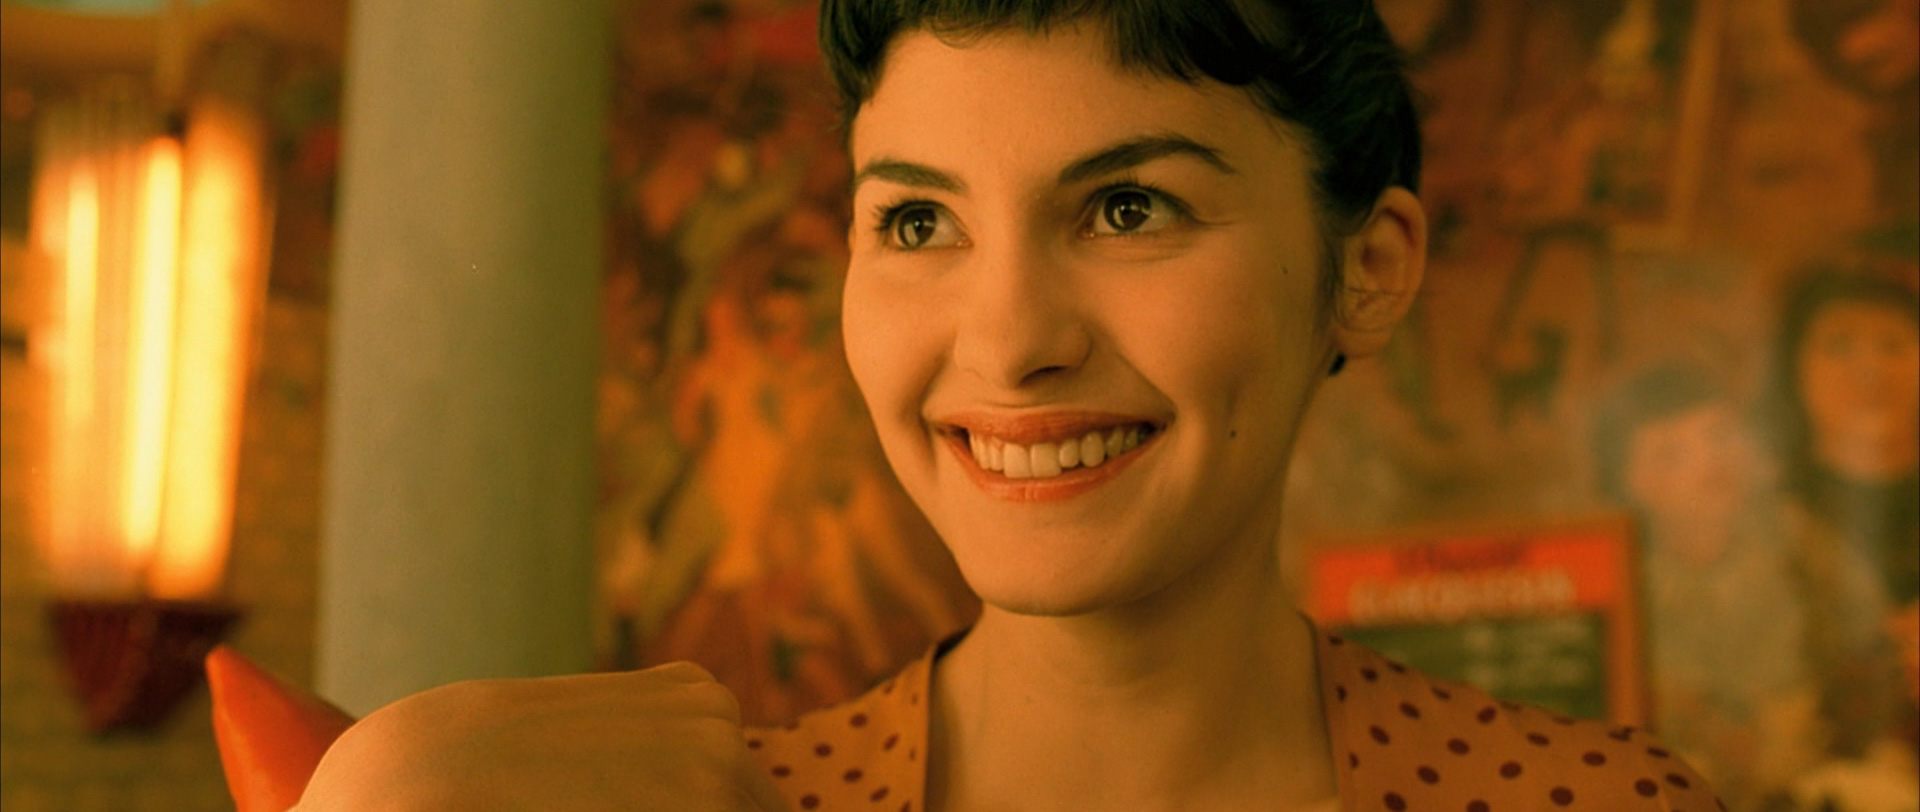 MOVIES UNDER THE STARS: AMELIE